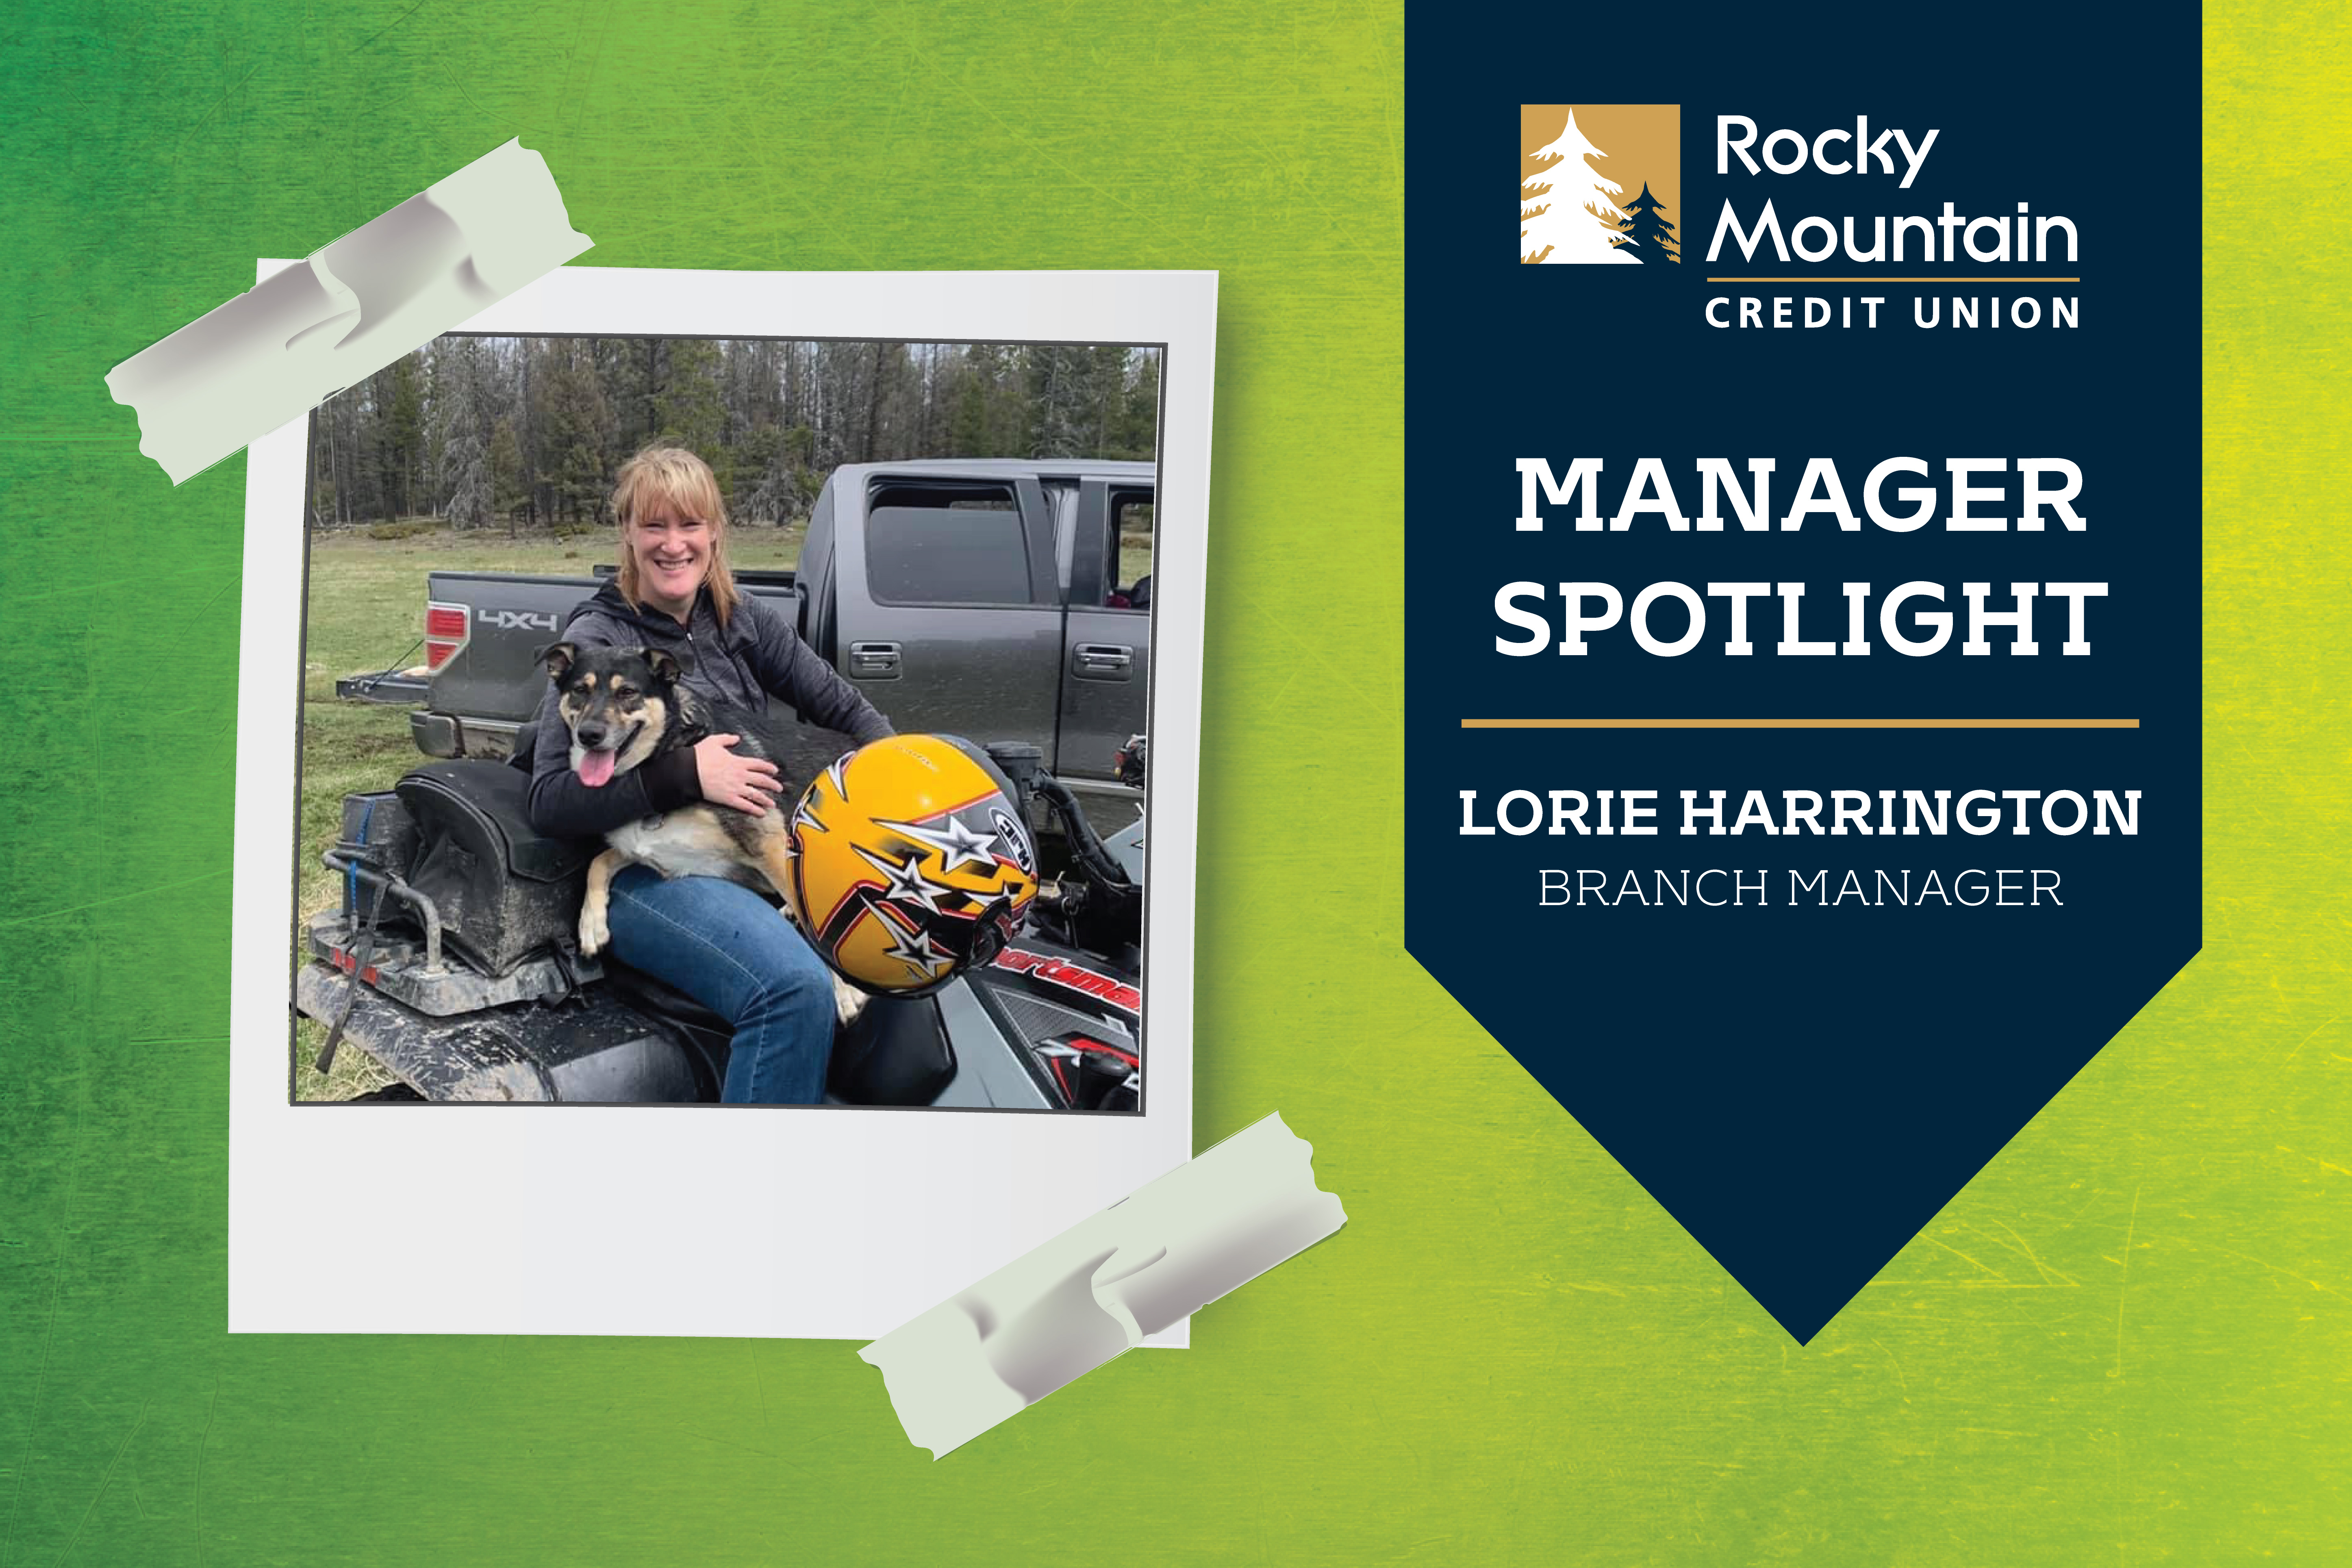 lorie harrington on a four-wheeler with her dog in her lap